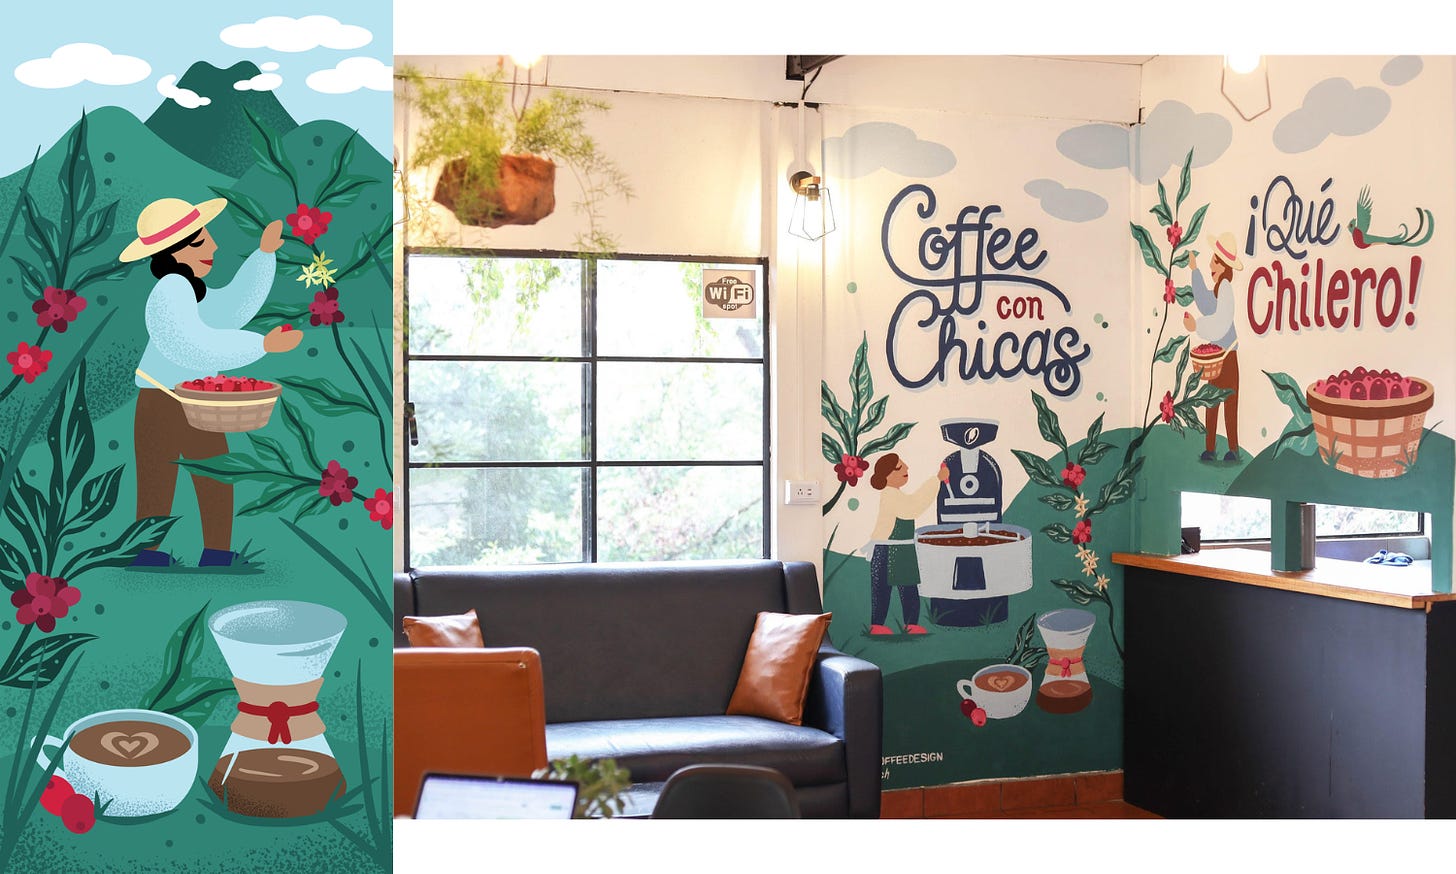 Focus on an illustrated design on the wall of a cafe featuring coffee farmers picking coffee cherries and a woman roasting coffee on a large machine.